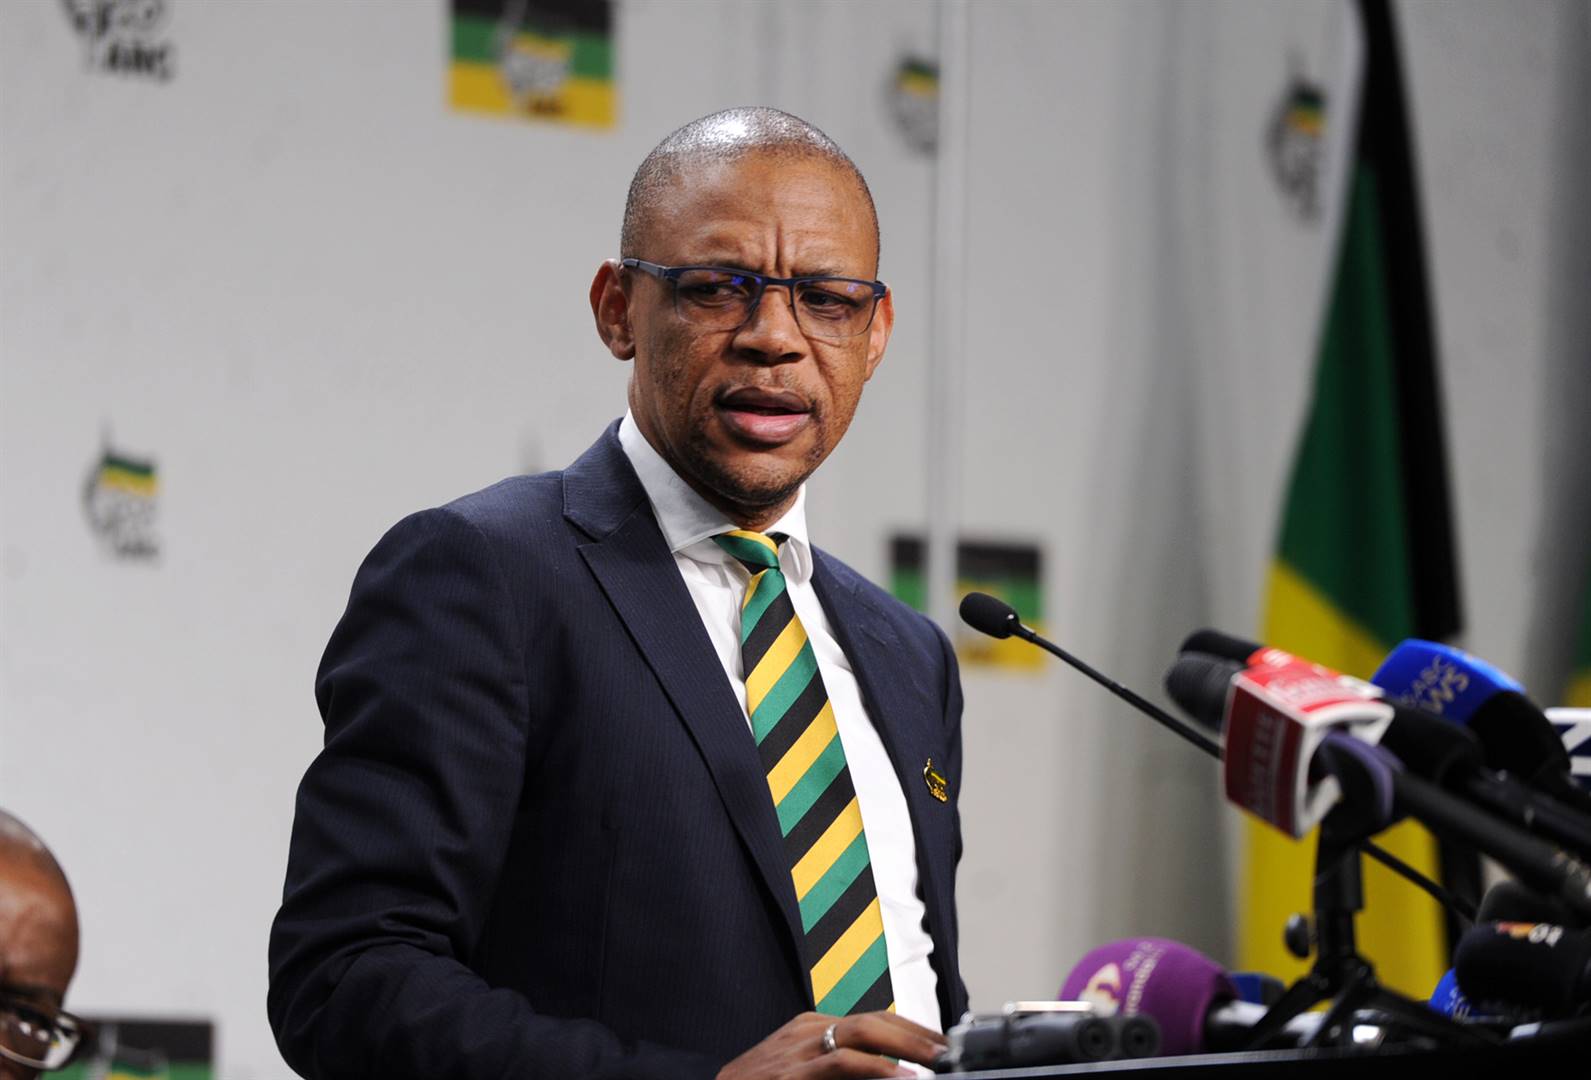 ANC spokesperson Pule Mabe said government and Eskom must move faster in their engagement to find long-lasting solutions to ease the power crisis. Photo: Daily Sun